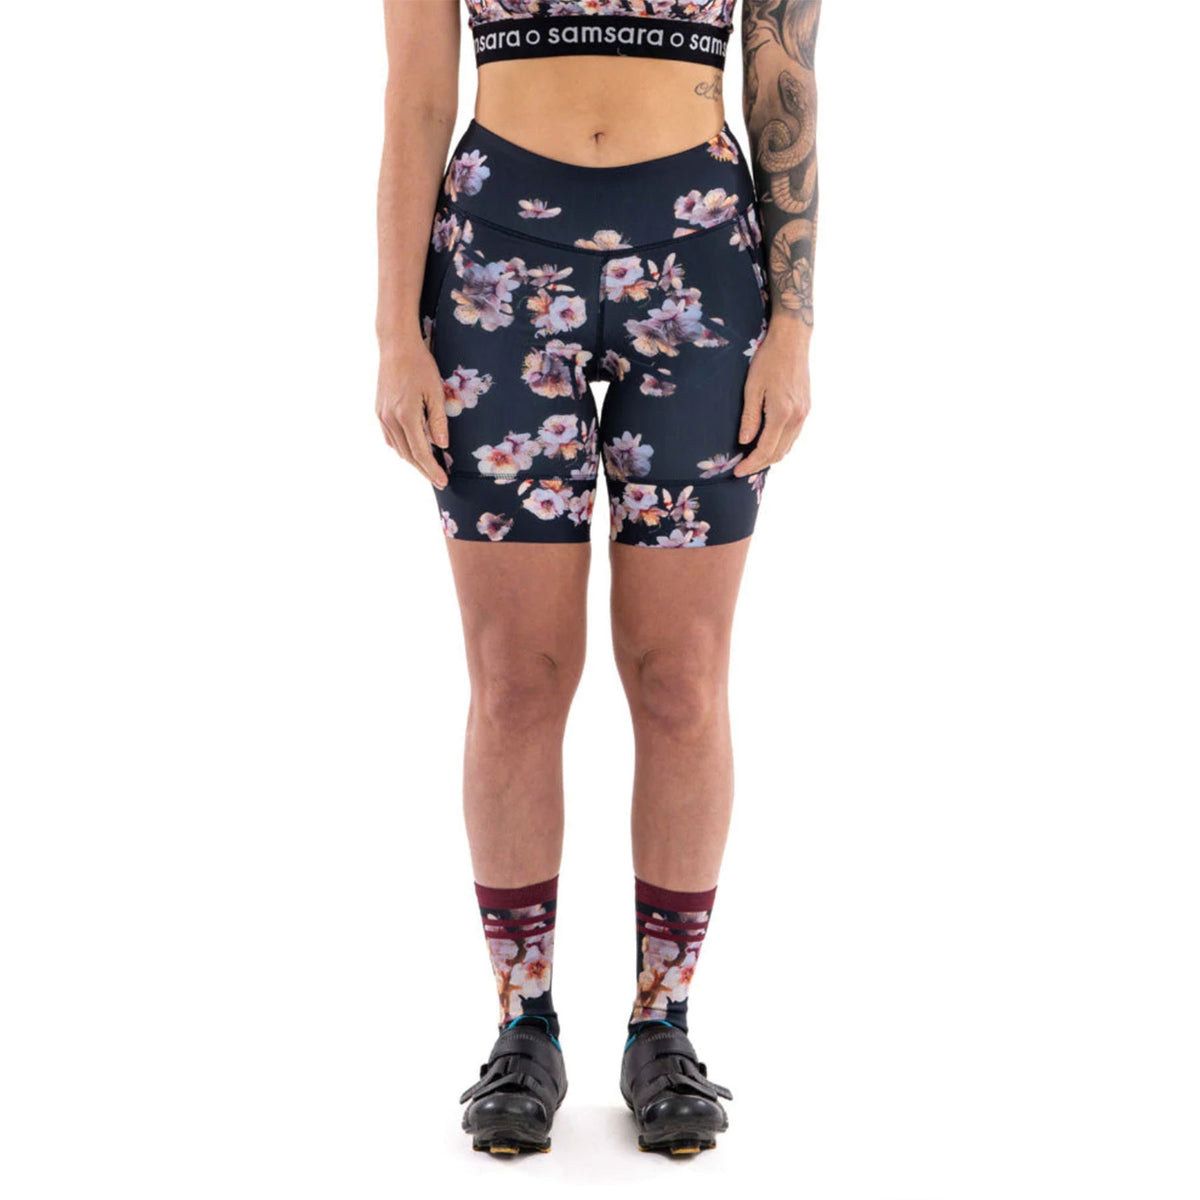 Hero image featuring the front of the Samsara performance 7" cycling shorts in cherry blossom